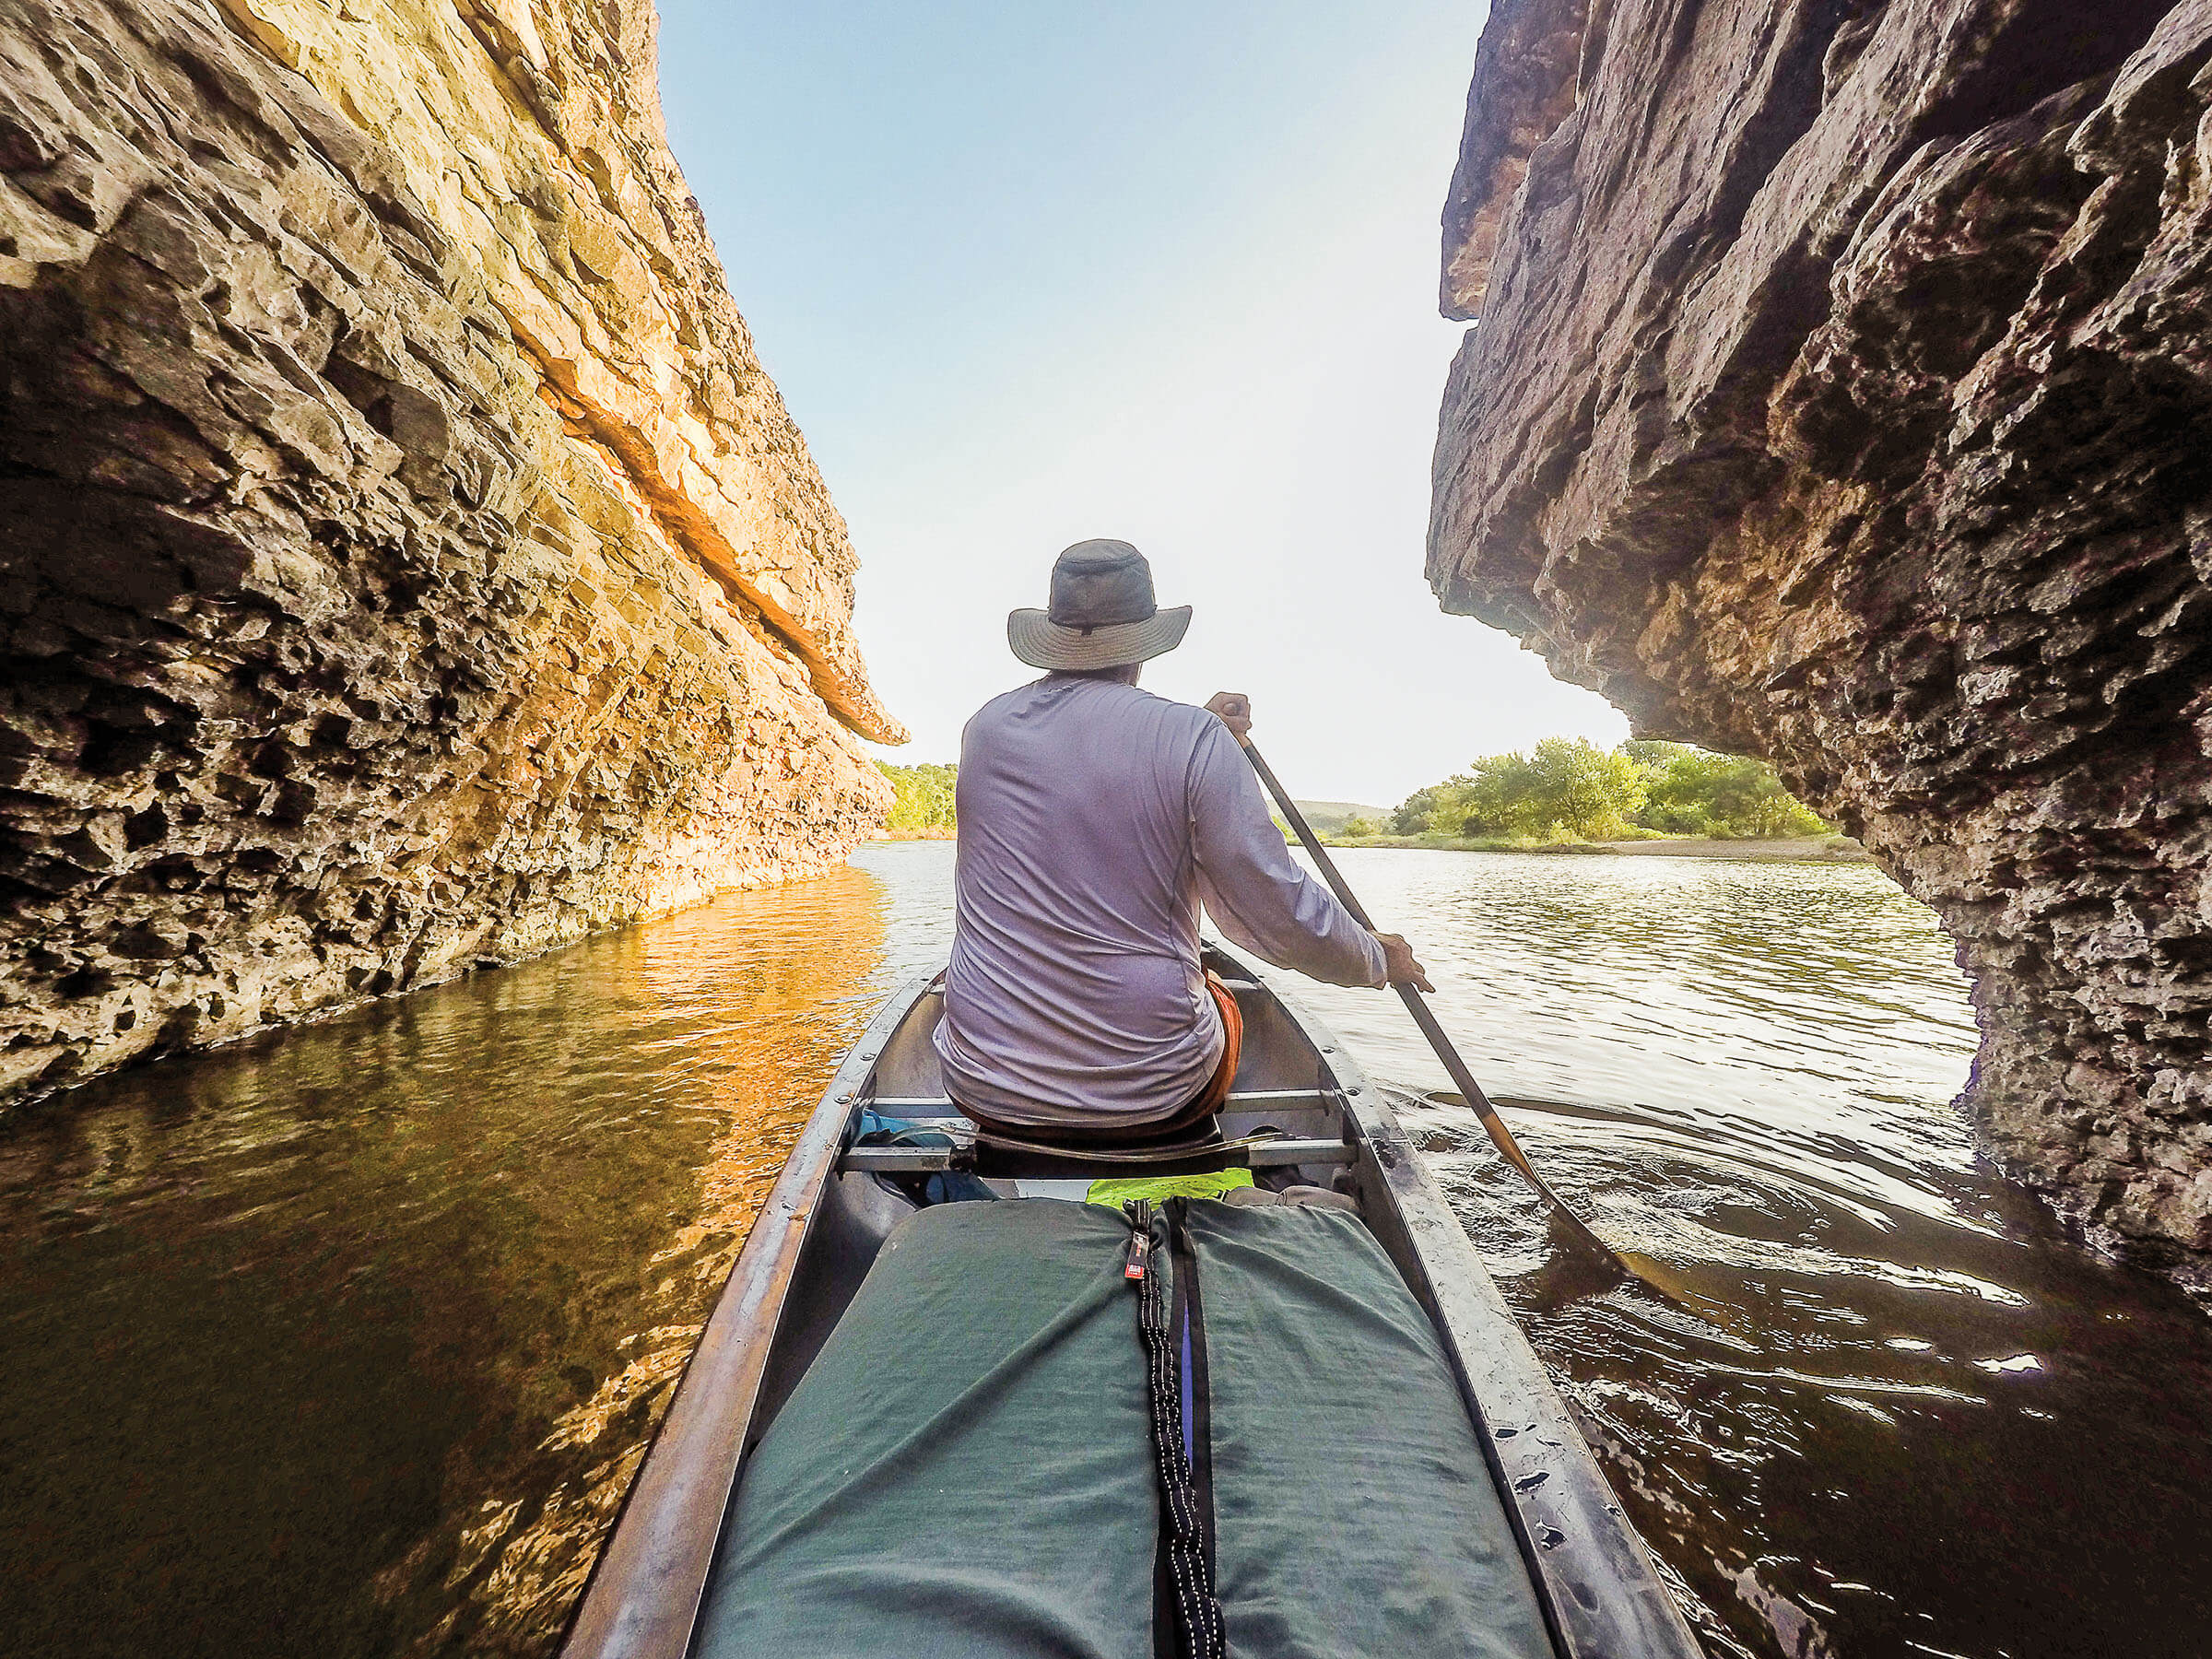 A man in a long-sleeved white shirt paddles between two rock outcroppings on a river